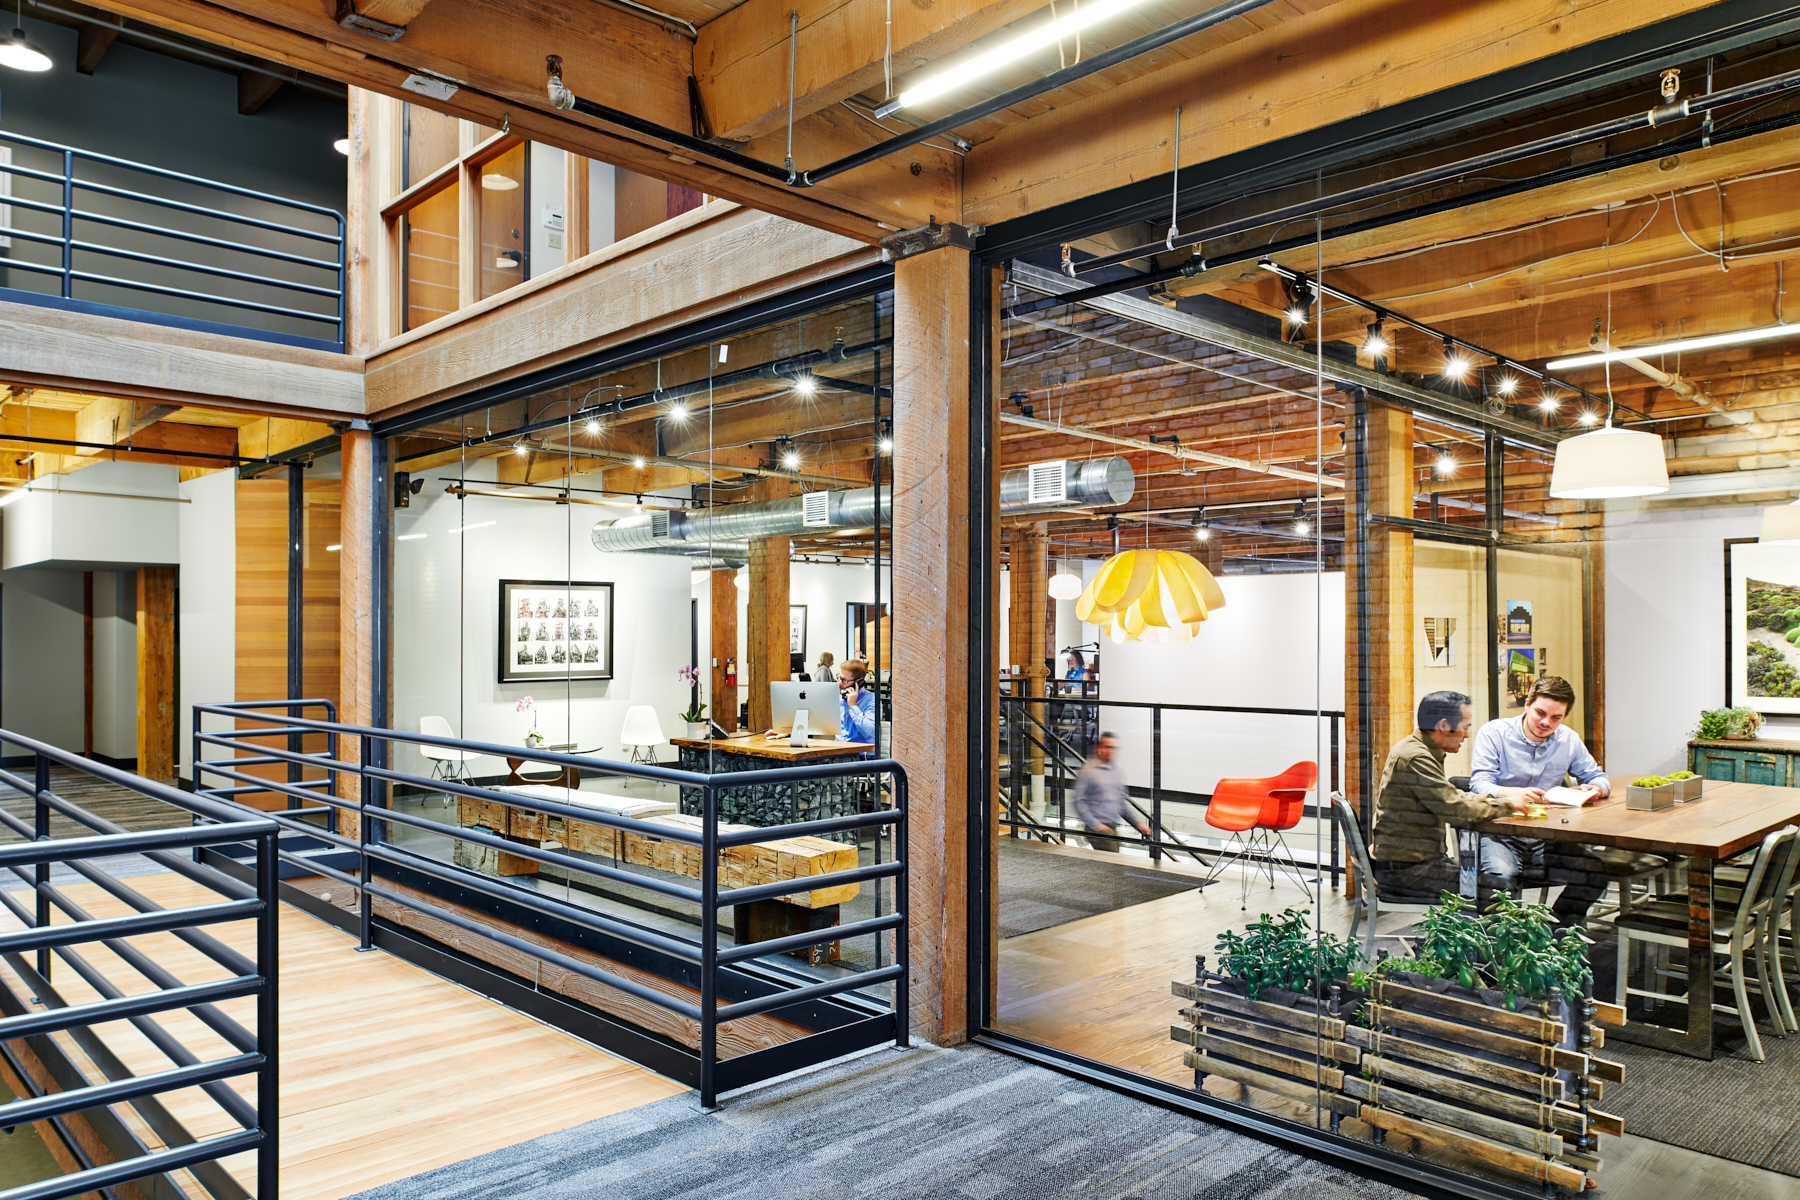 A view into NewStudio Architecture's Saint Paul, Minnesota office from the building's common area.